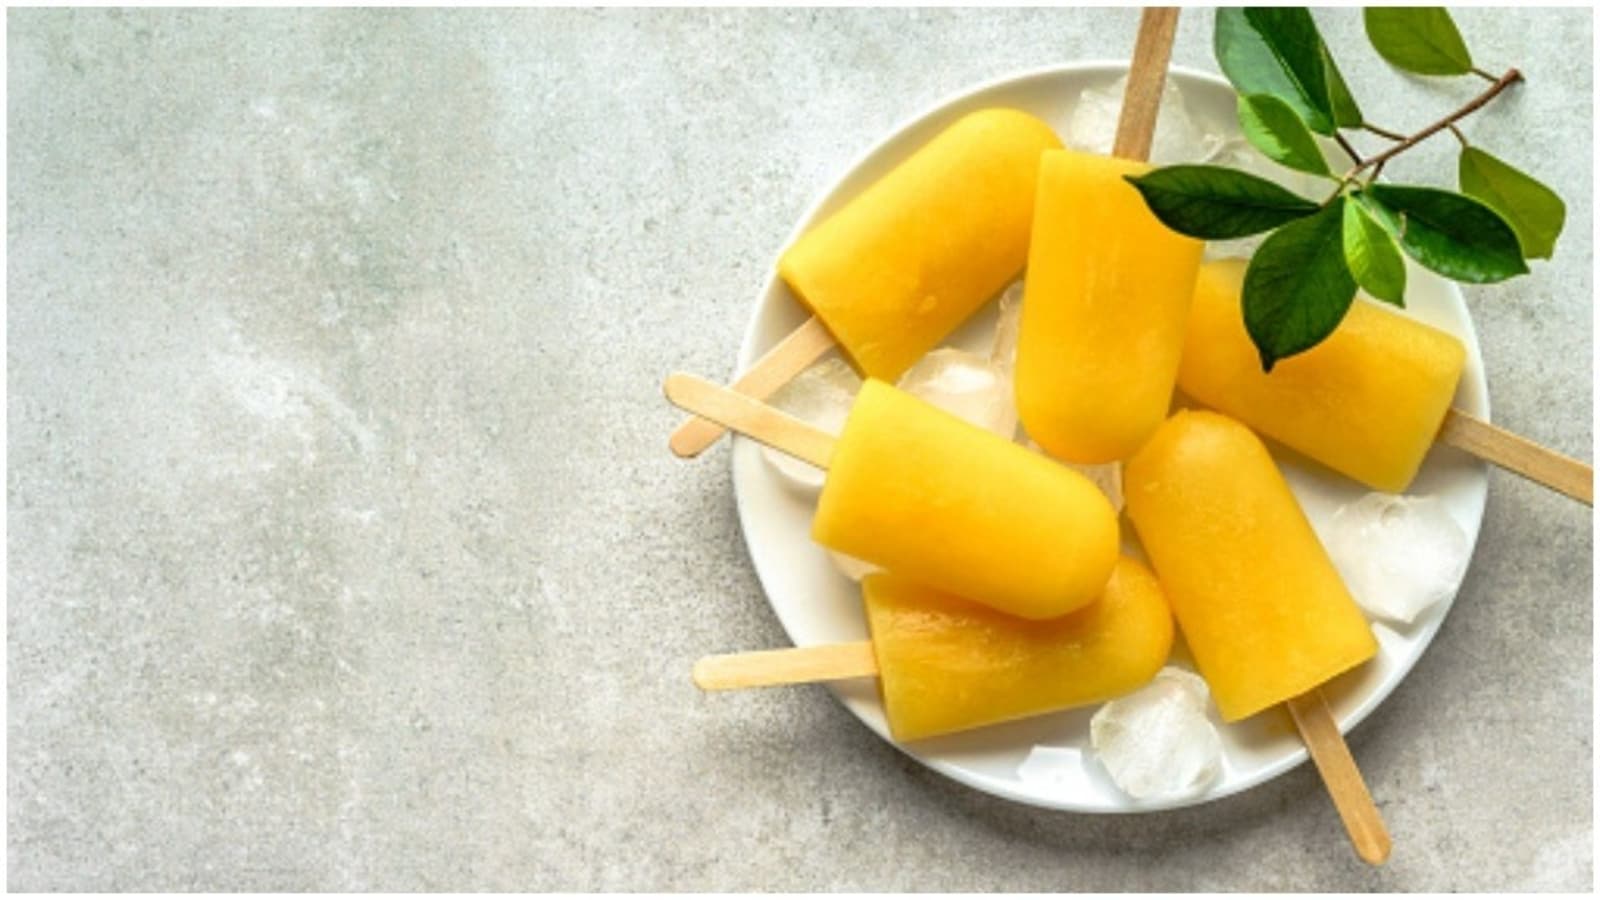 Relive your childhood with mango yoghurt popsicles. Recipe inside